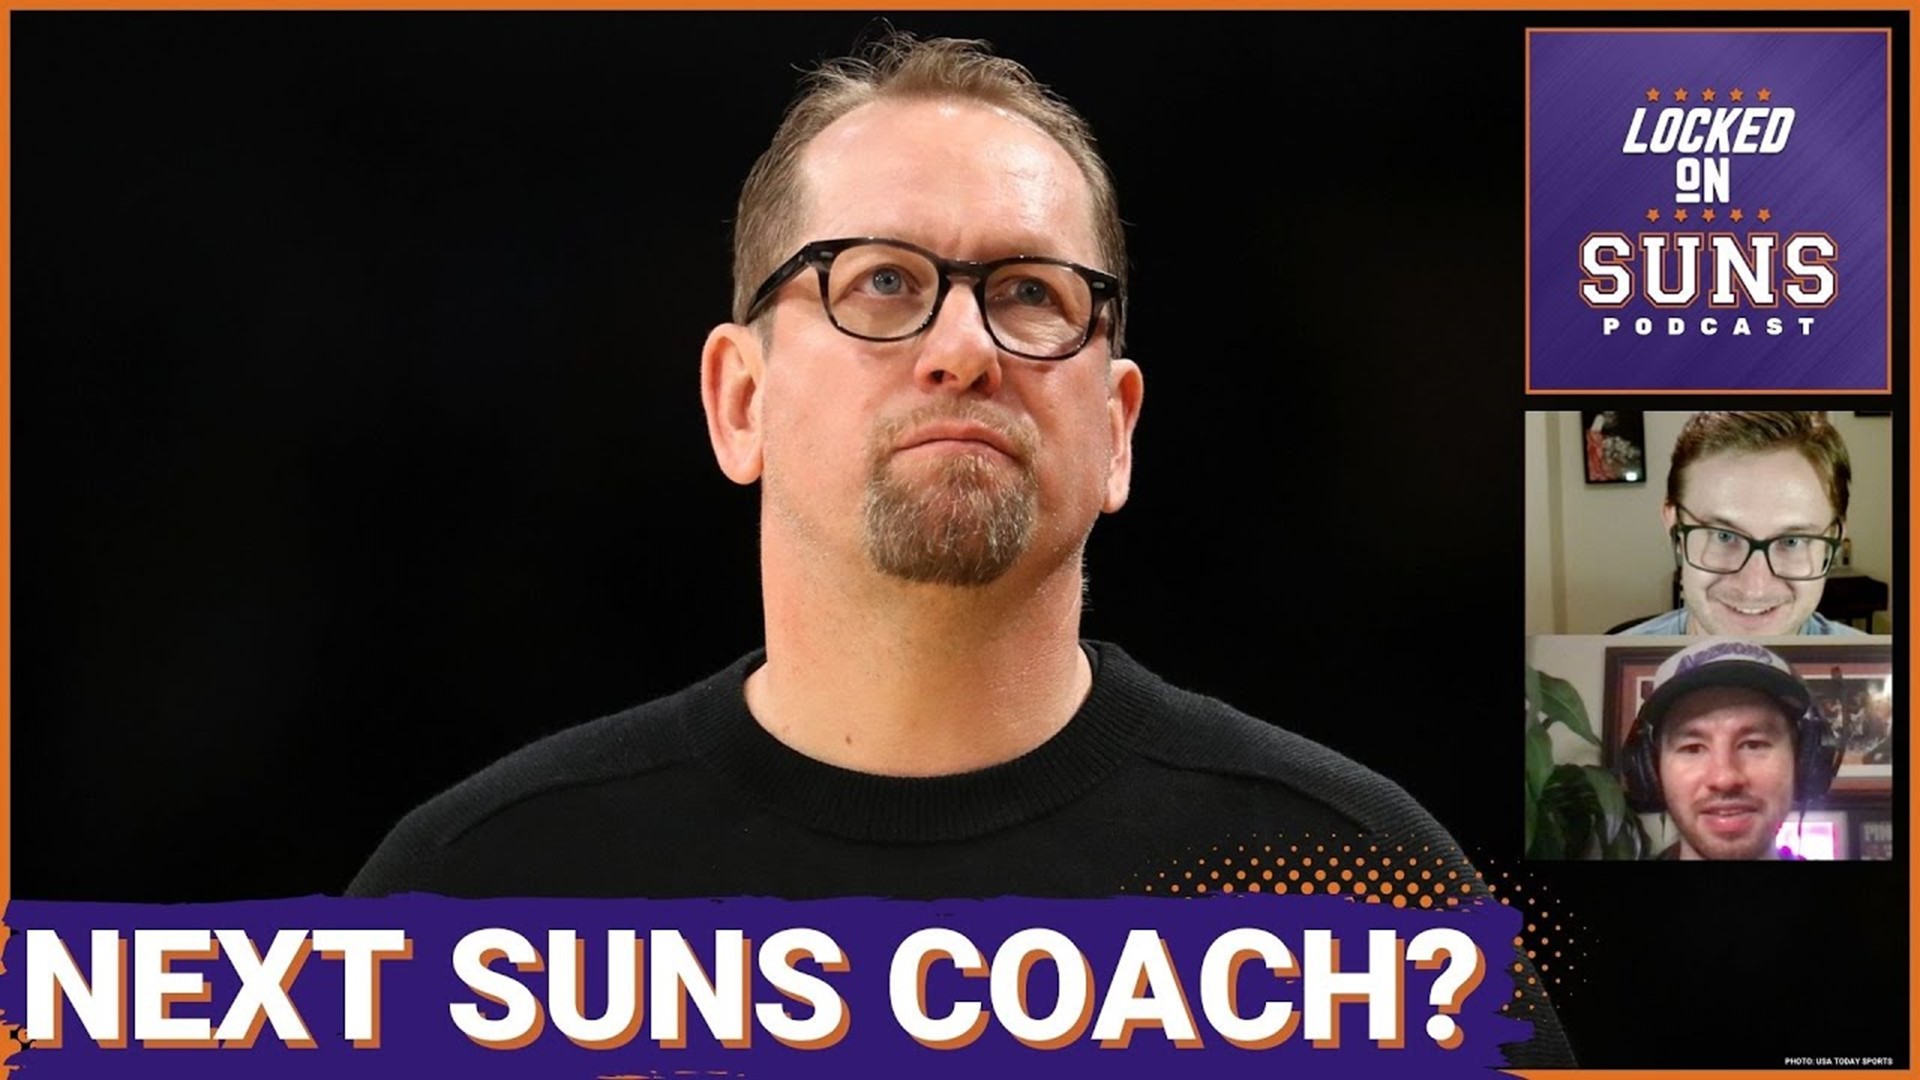 The Phoenix Suns are zeroing on in head coach replacements including Nick Nurse, Ty Lue and assistant Kevin Young as Mat Ishbia makes his imprint on the Suns